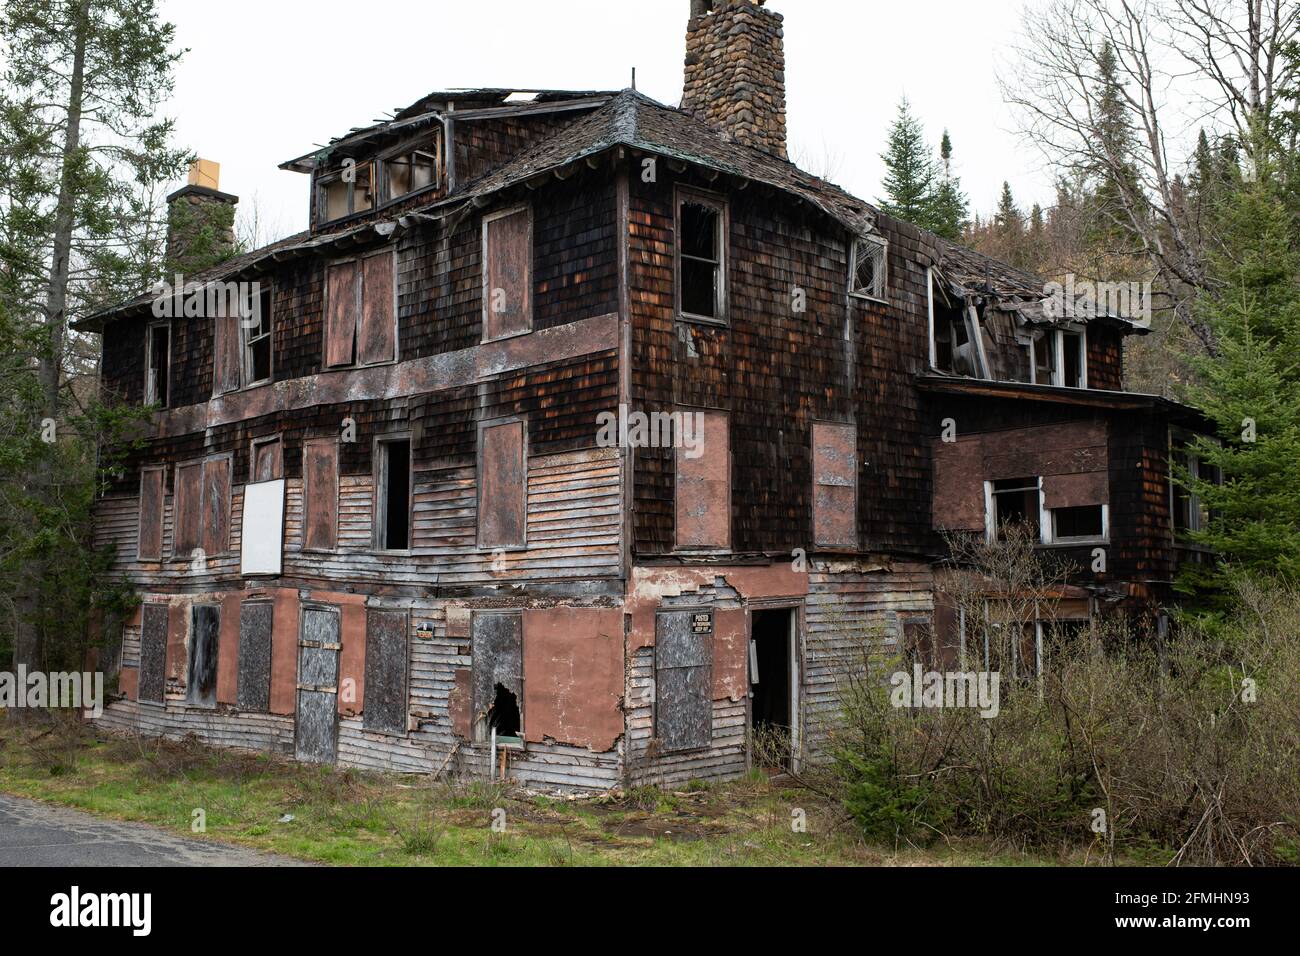 An old abandoned deteriorating building in the Adirondack Mountains, NY USA Stock Photo